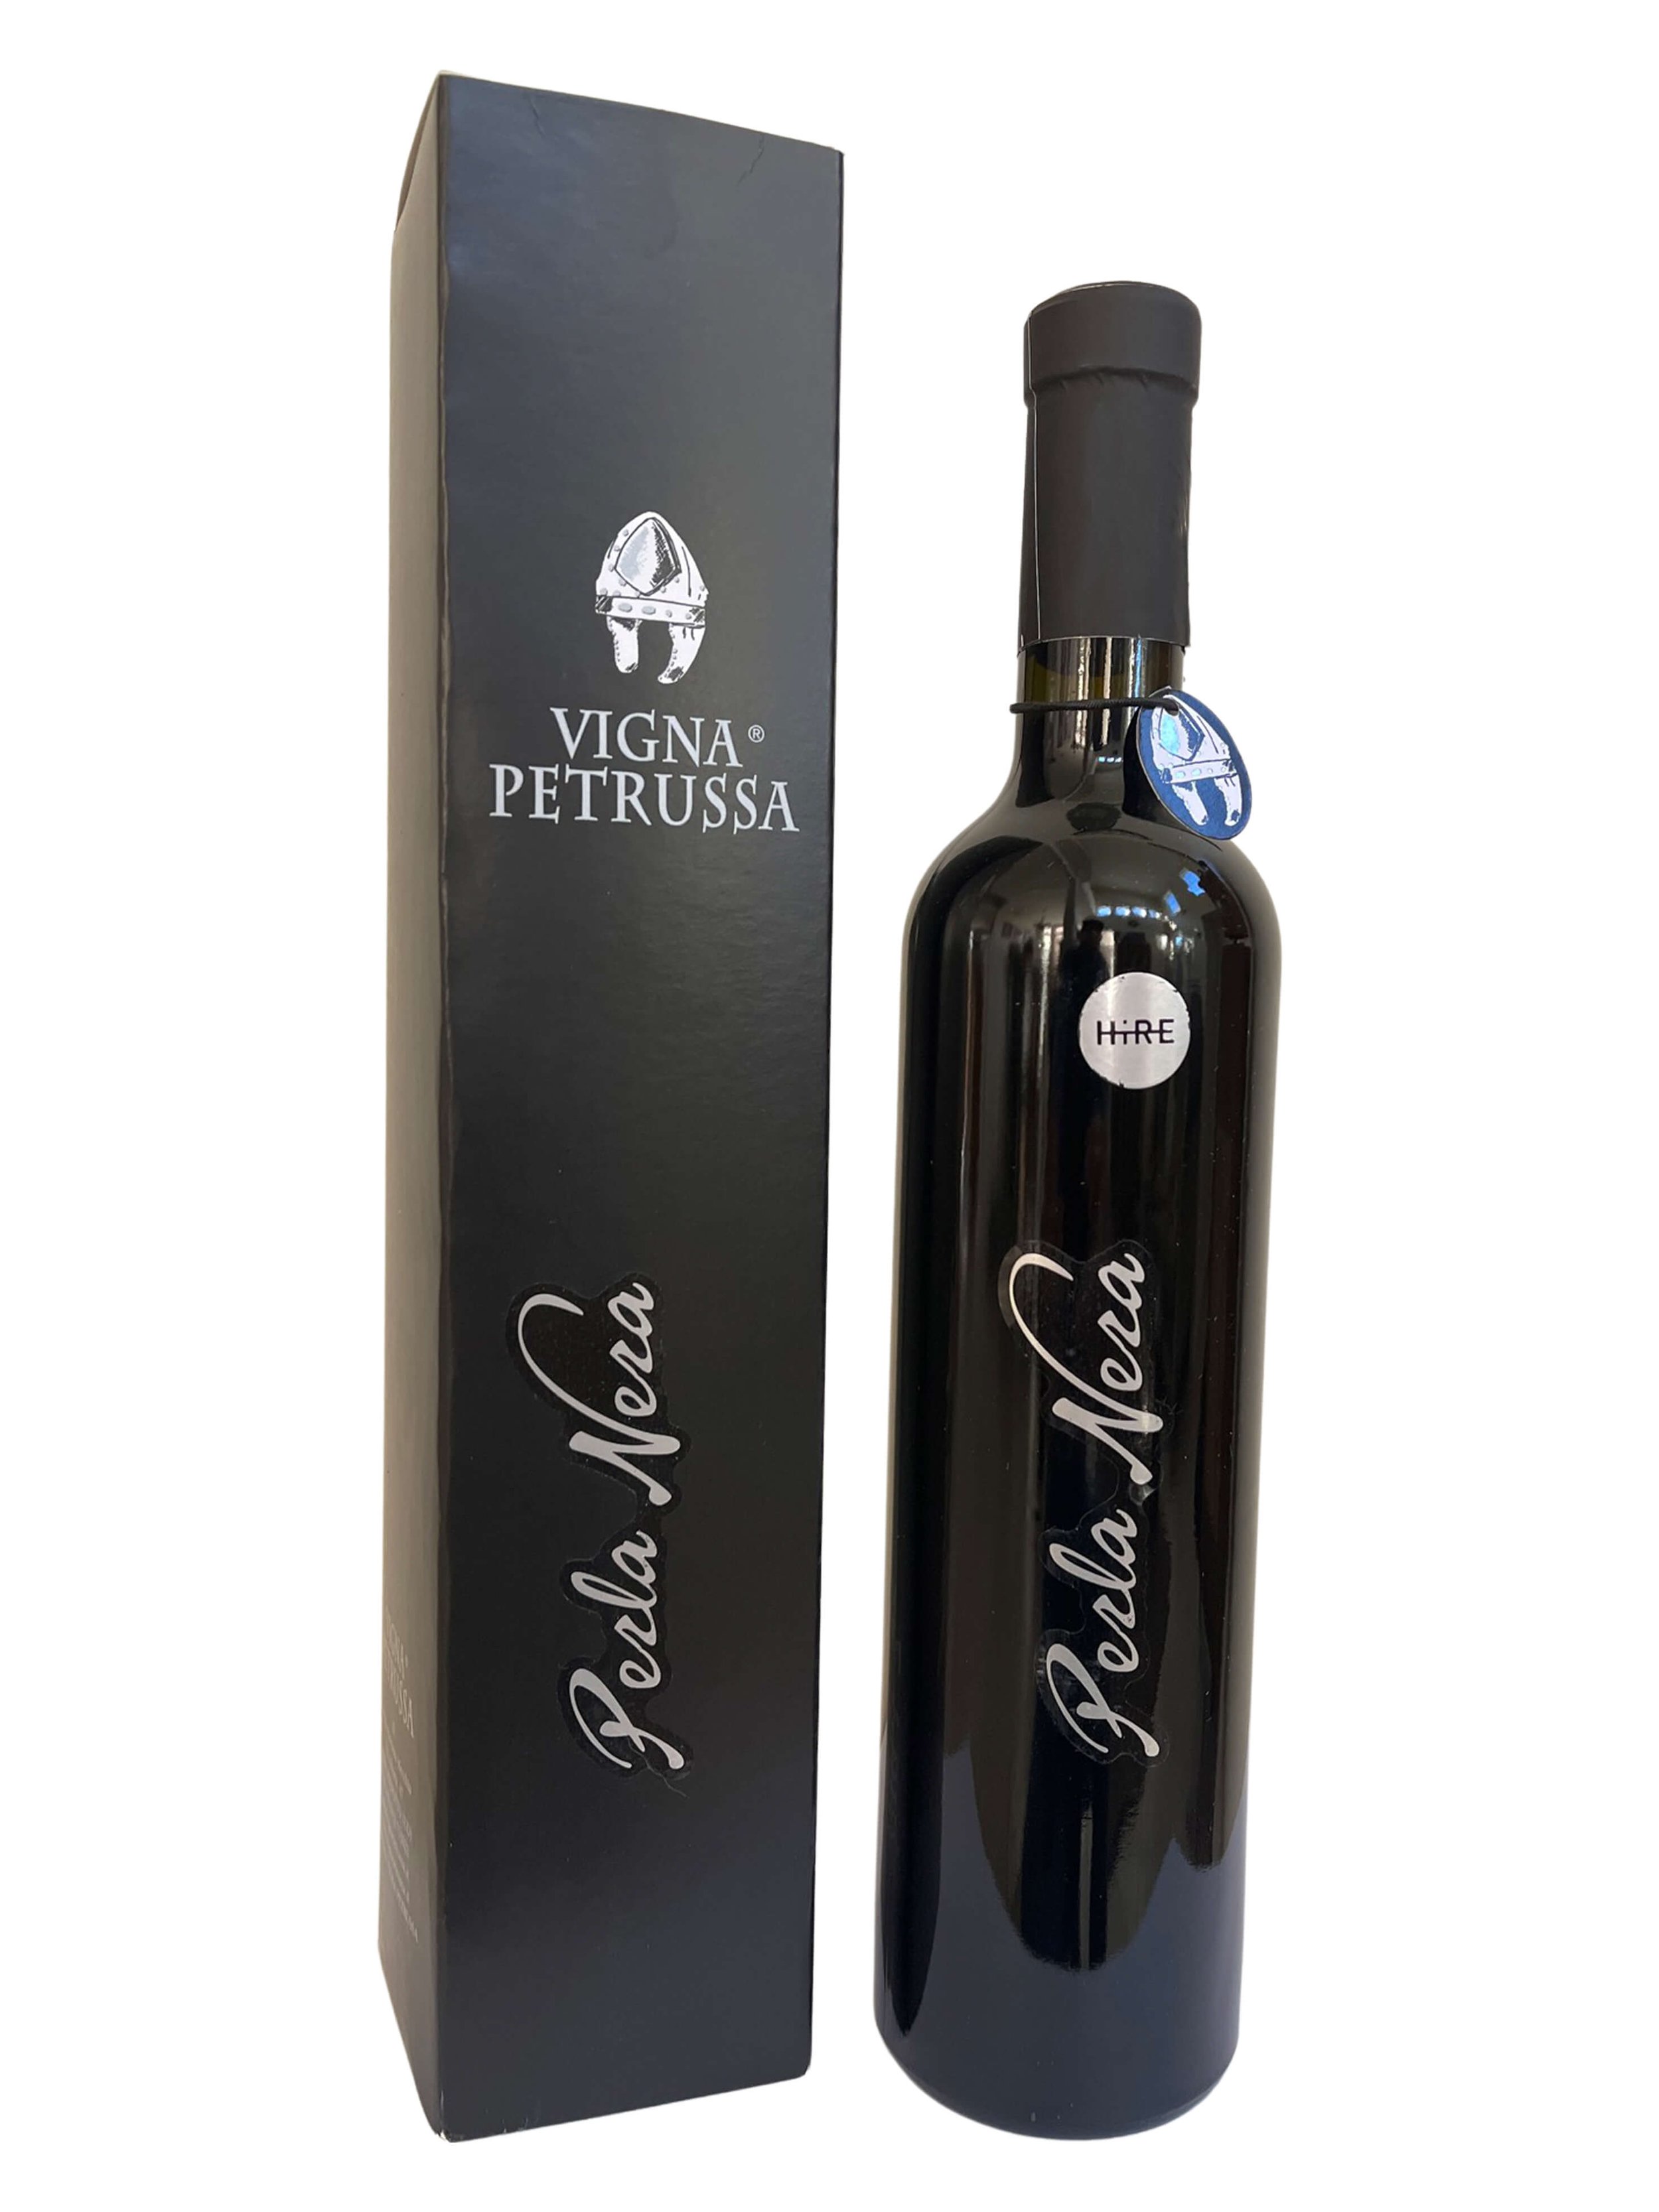 The Best Sweet Red Wine to Come from Vigna Petrussa — Vero